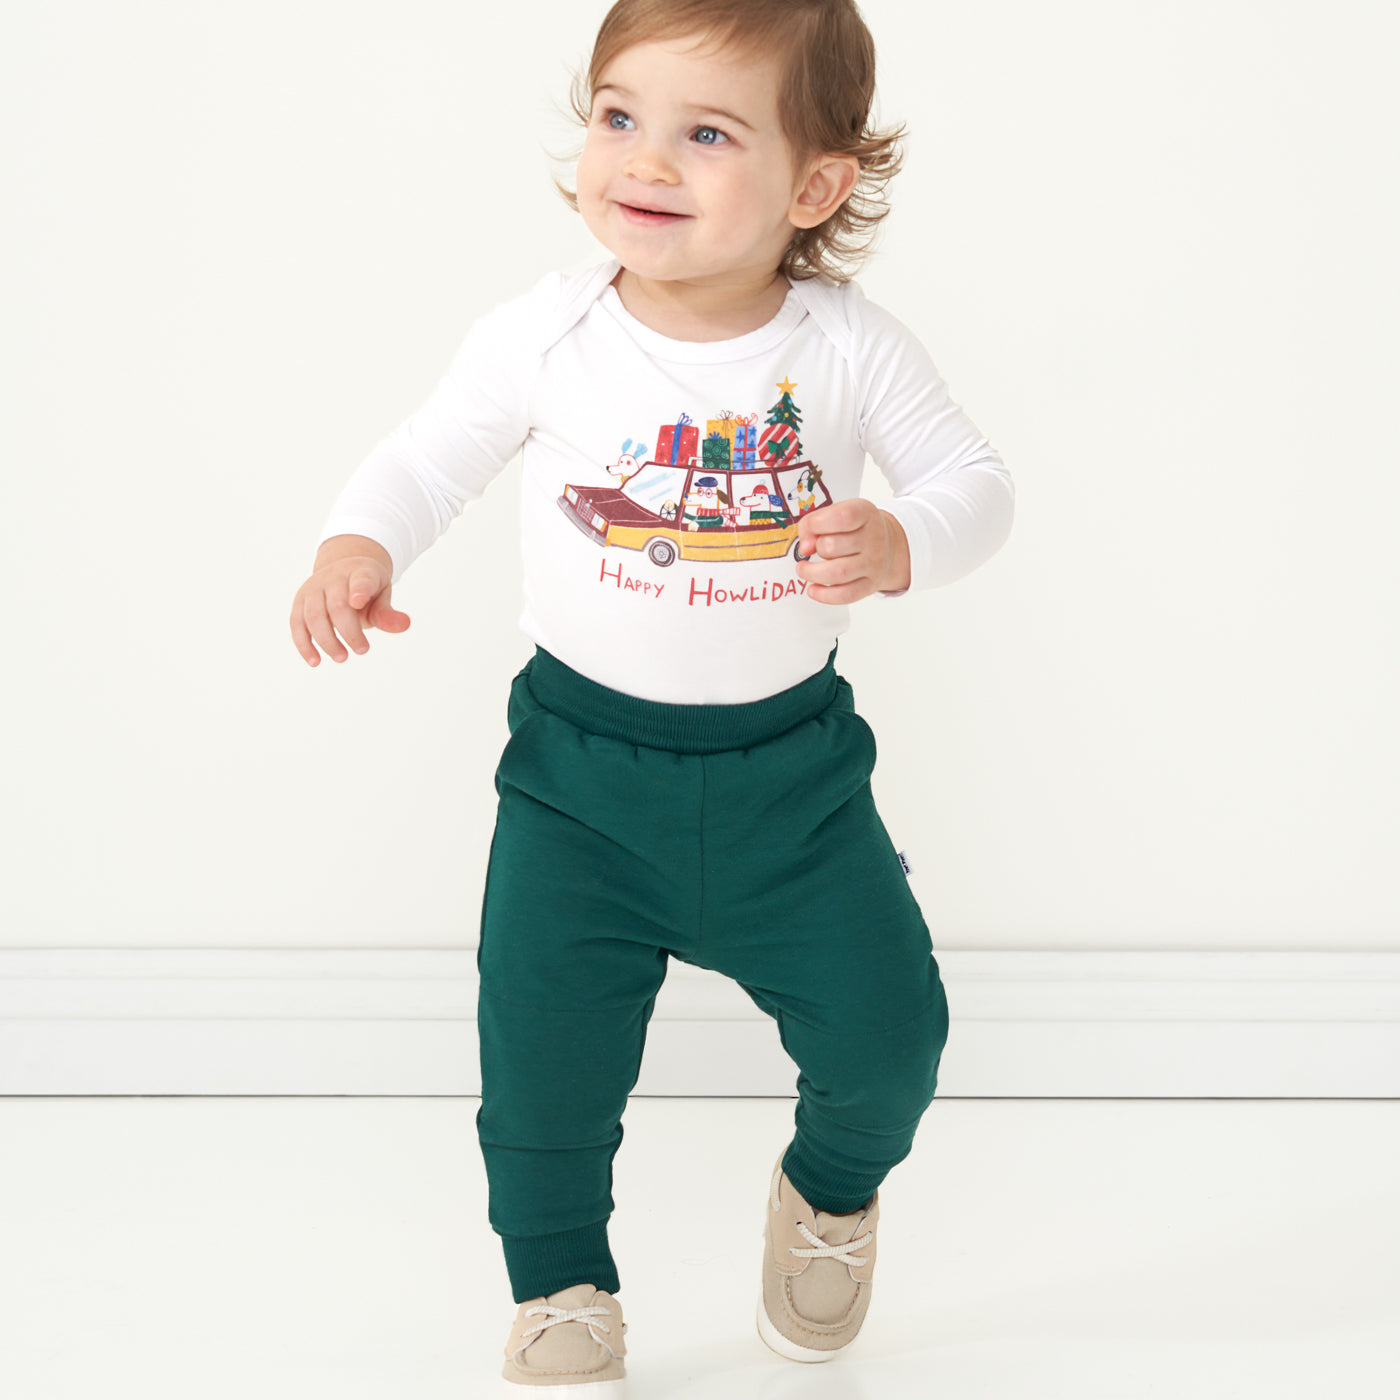 Child wearing Emerald Joggers paired with a Happy Howlidays bodysuit